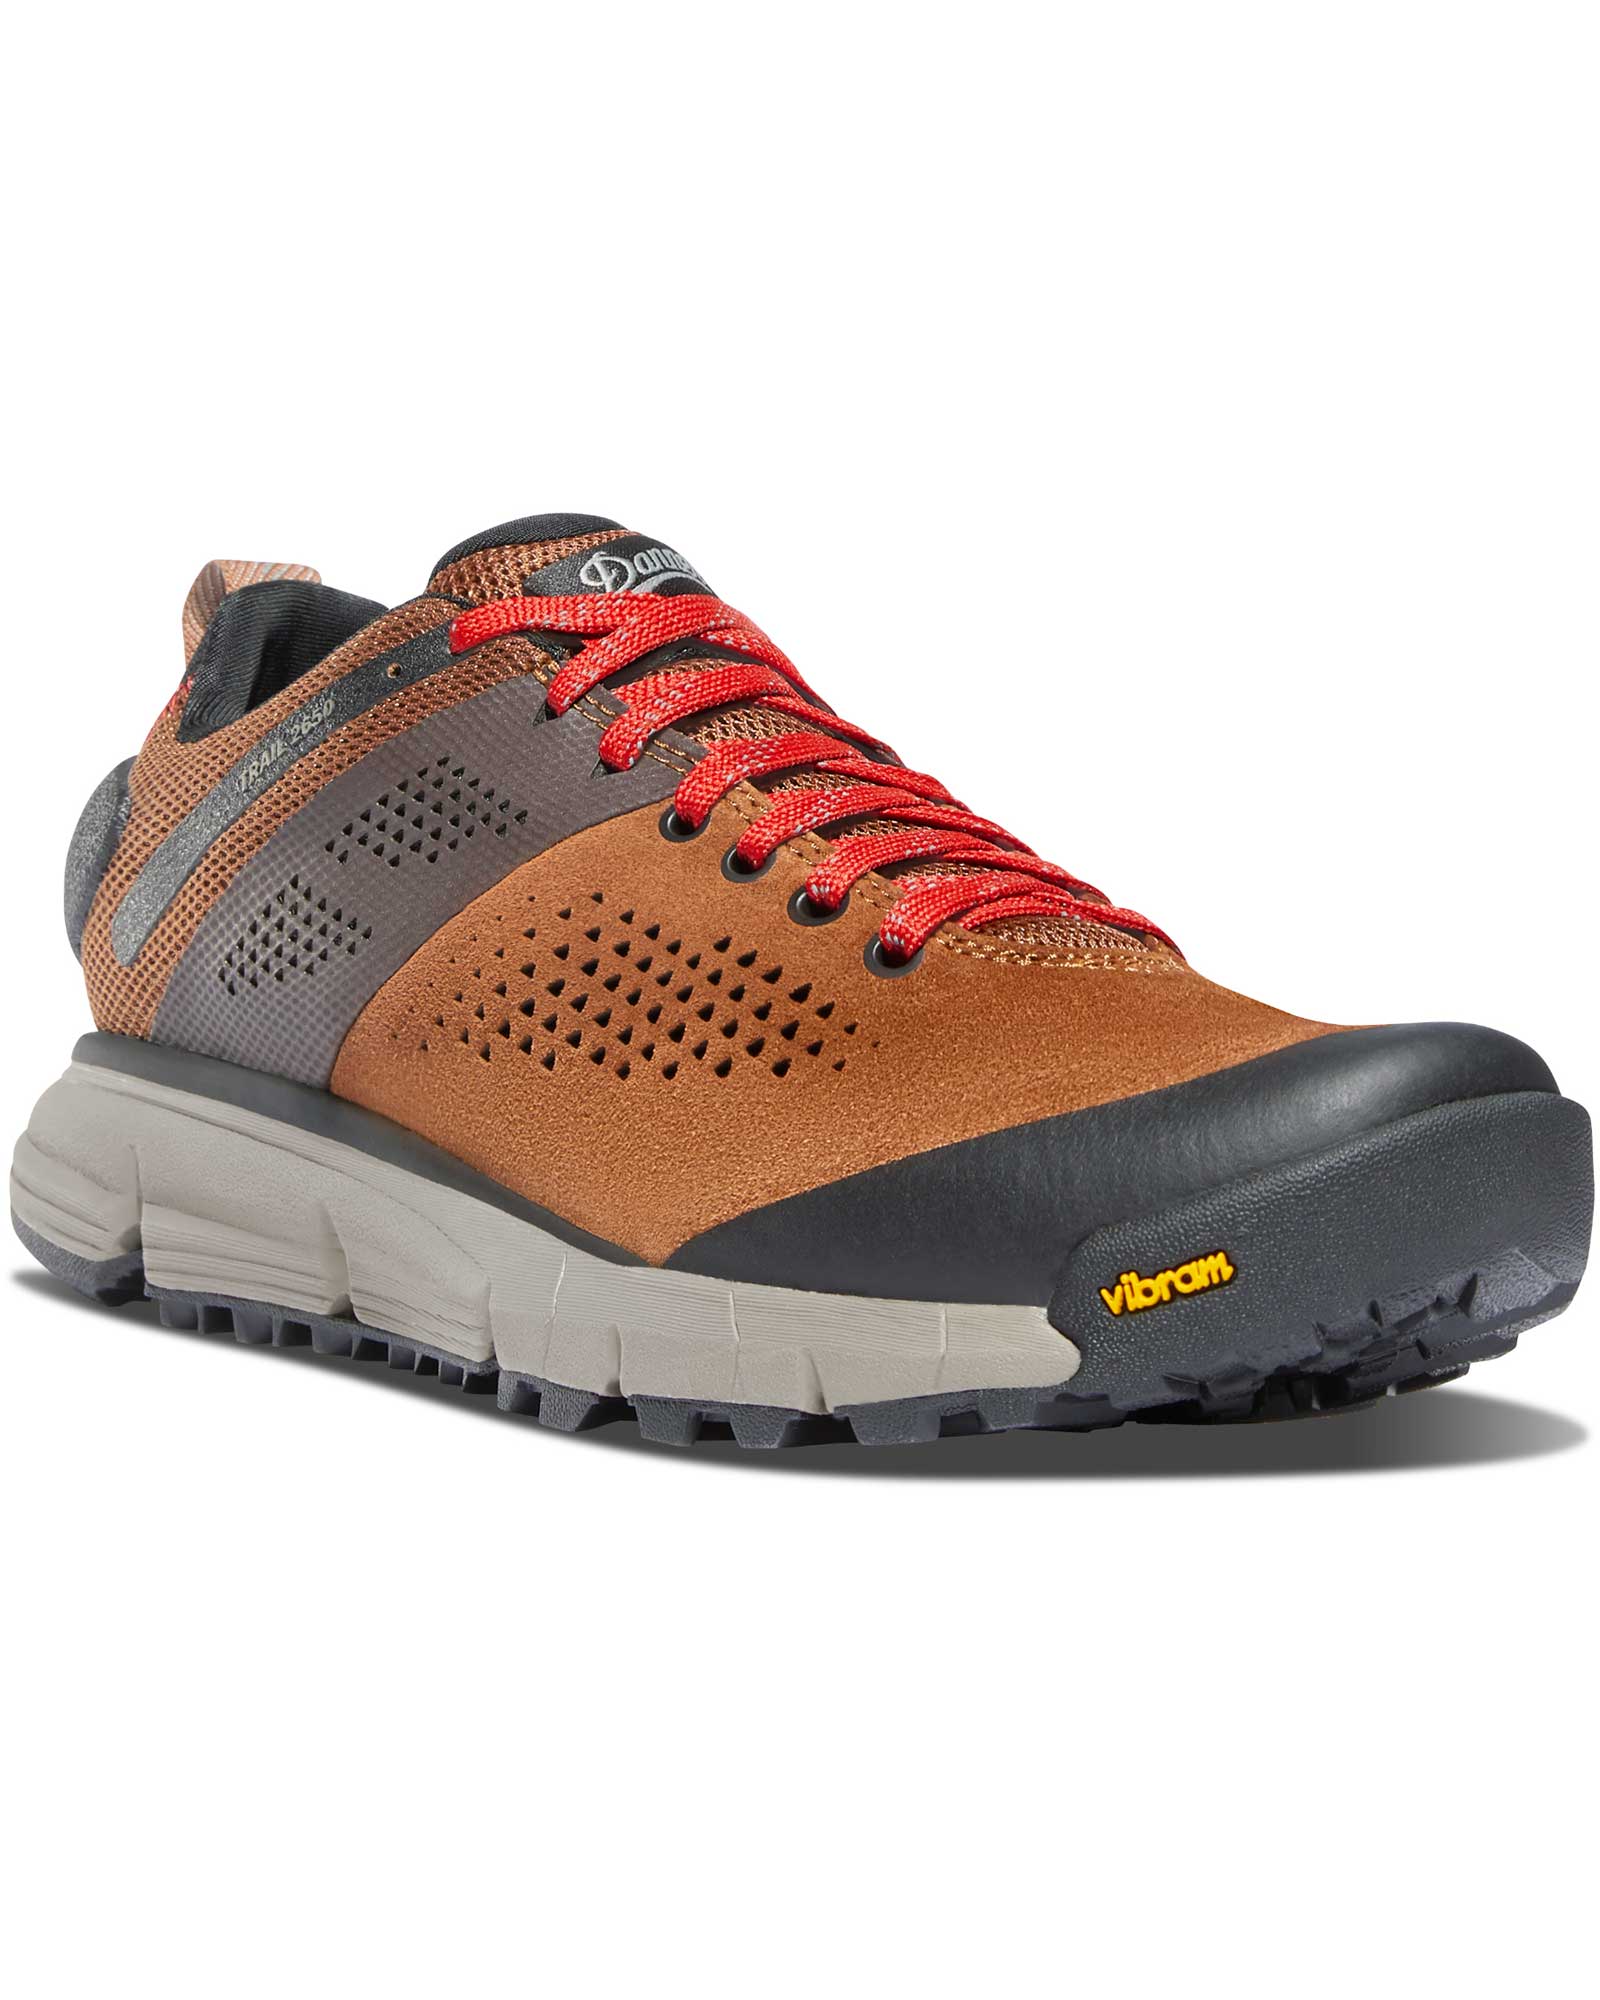 Danner Women’s Trail 2650 Trainers - Brown/Red UK 4